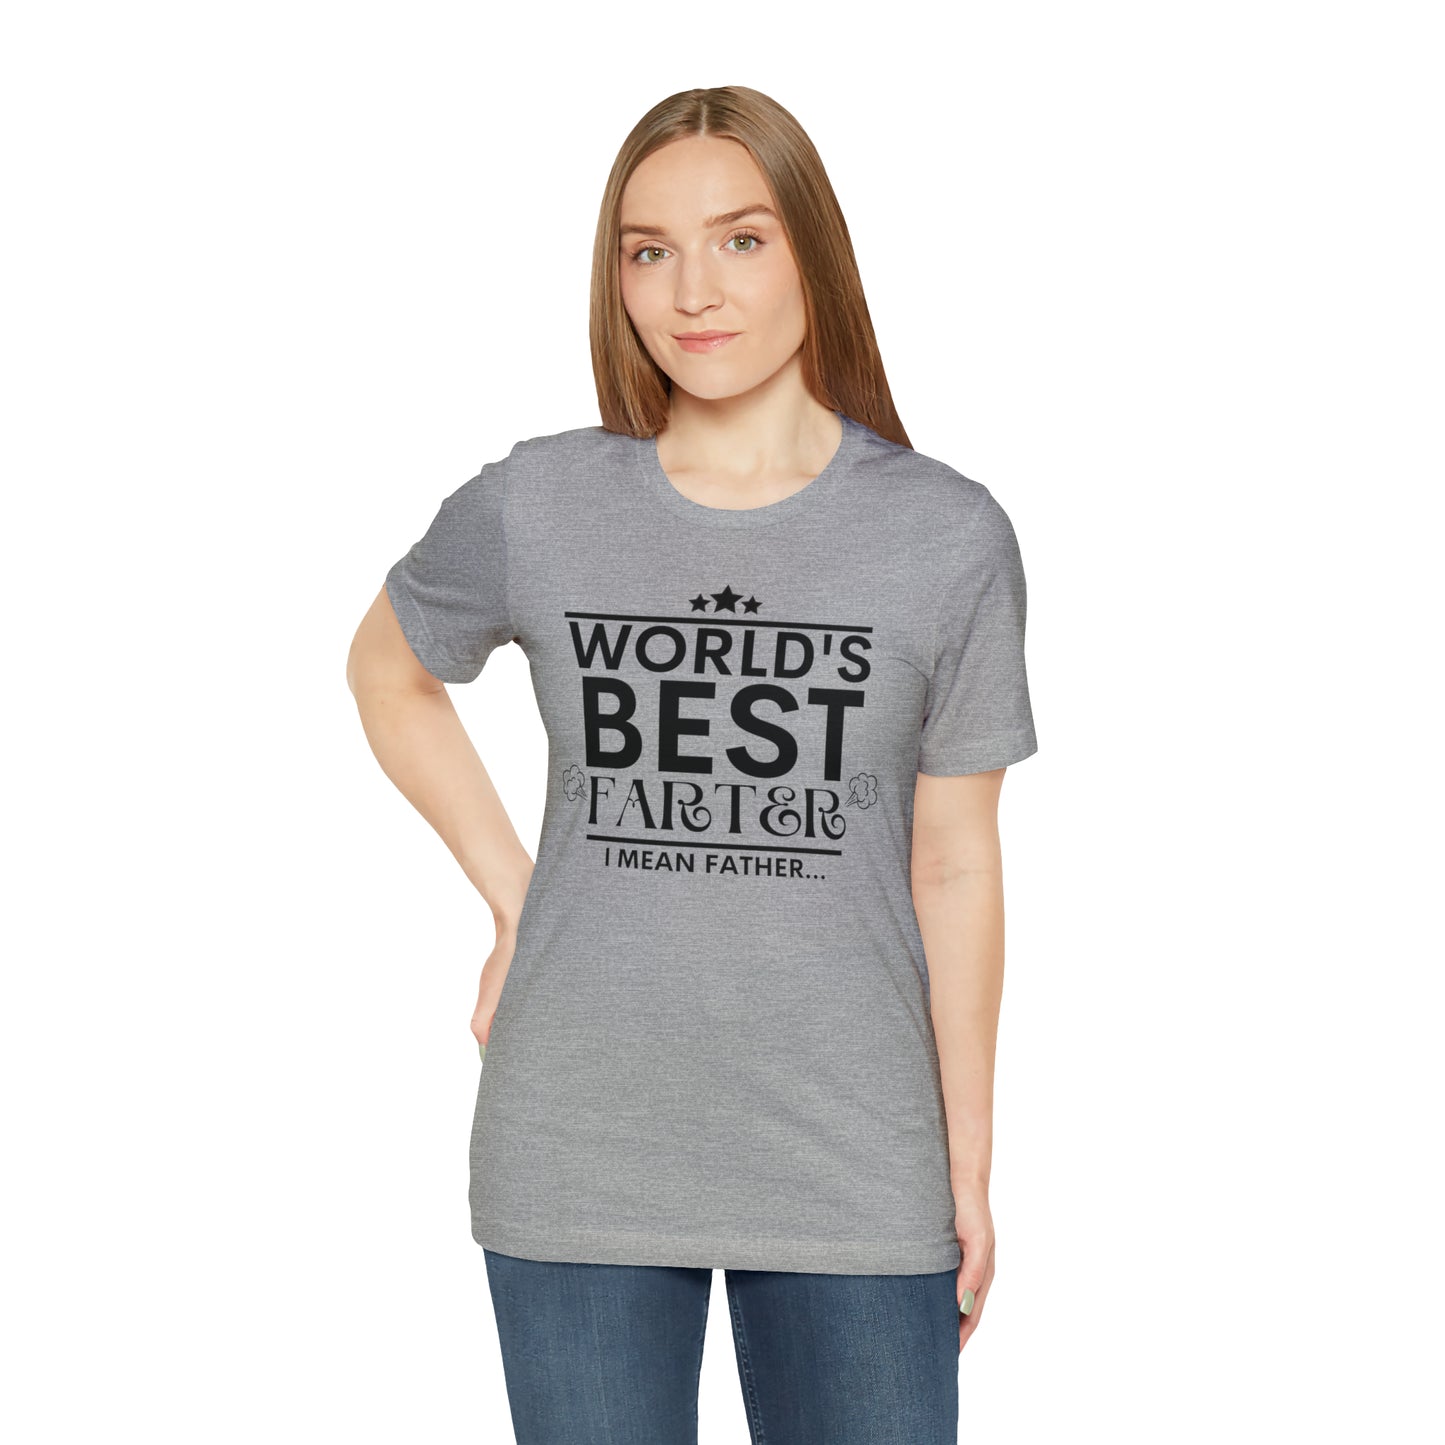 World's Best Farter T-shirt | Funny Dad T-shirt, Father's Day Gift, T-shirt For Dad, Best Dad Tee